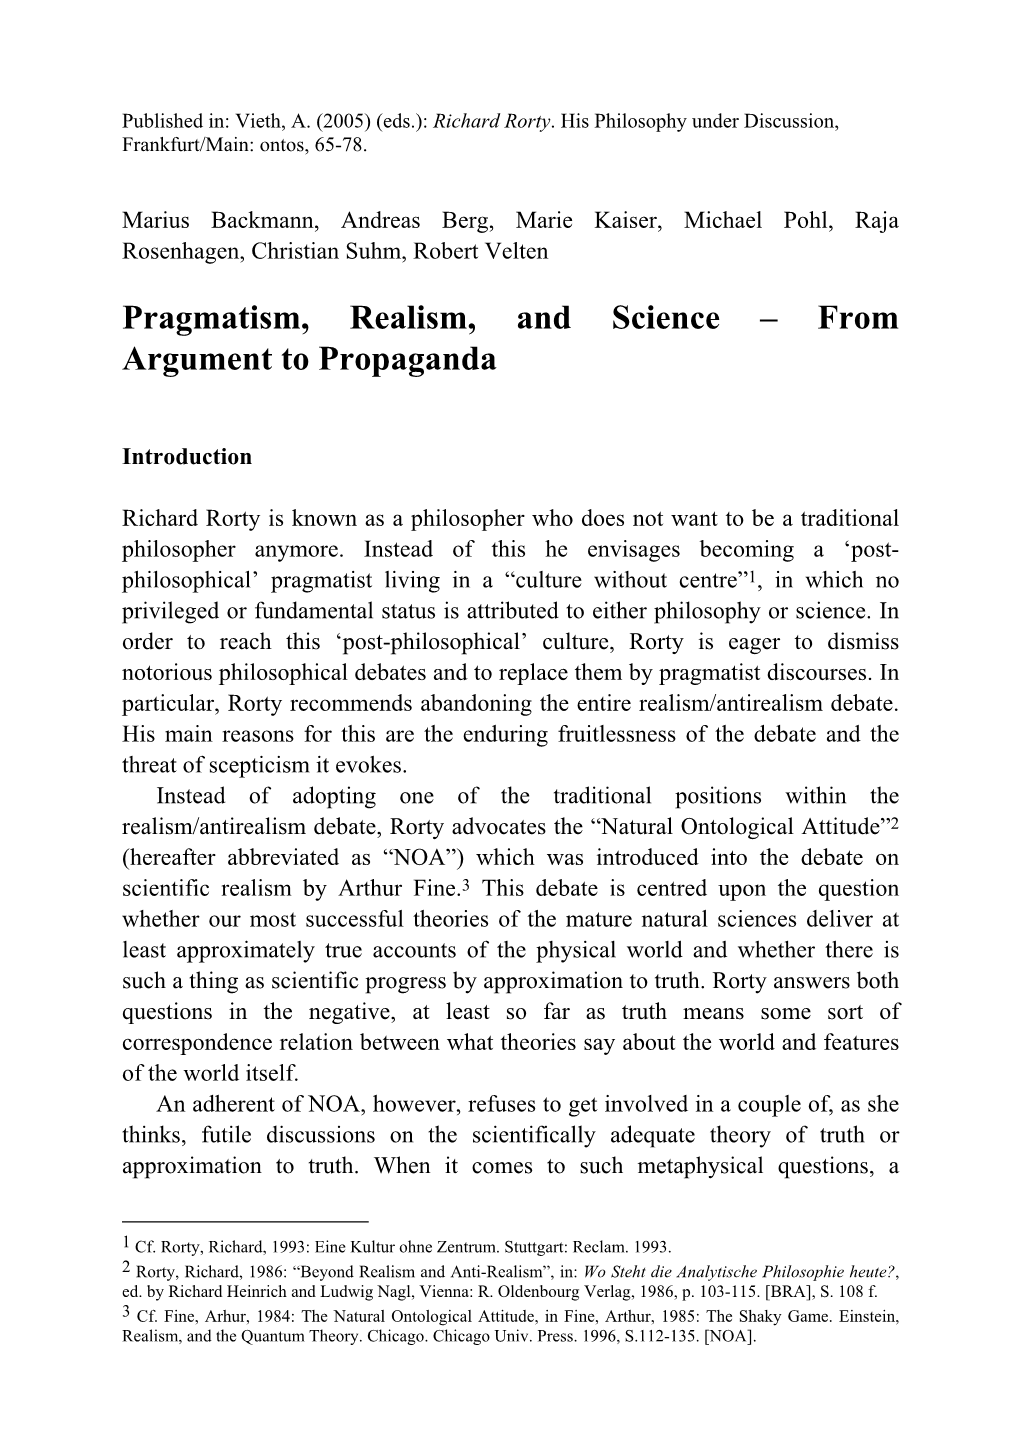 Pragmatism, Realism, and Science – from Argument to Propaganda